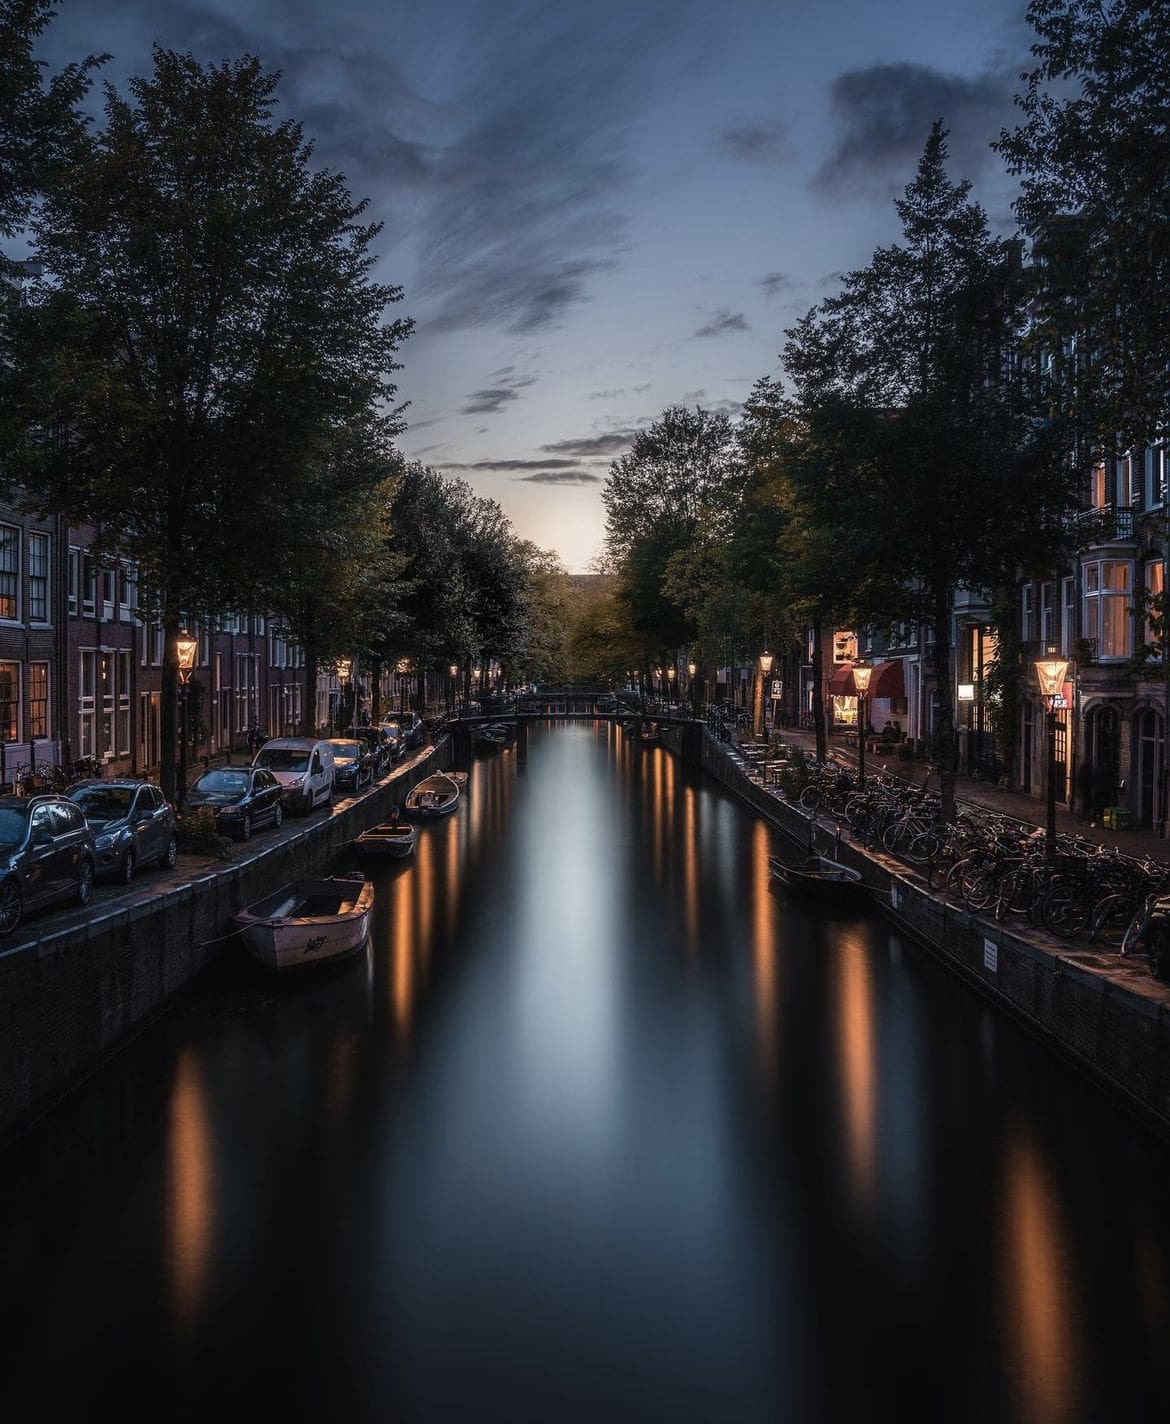 Calm evenings along the canals of Amsterdam